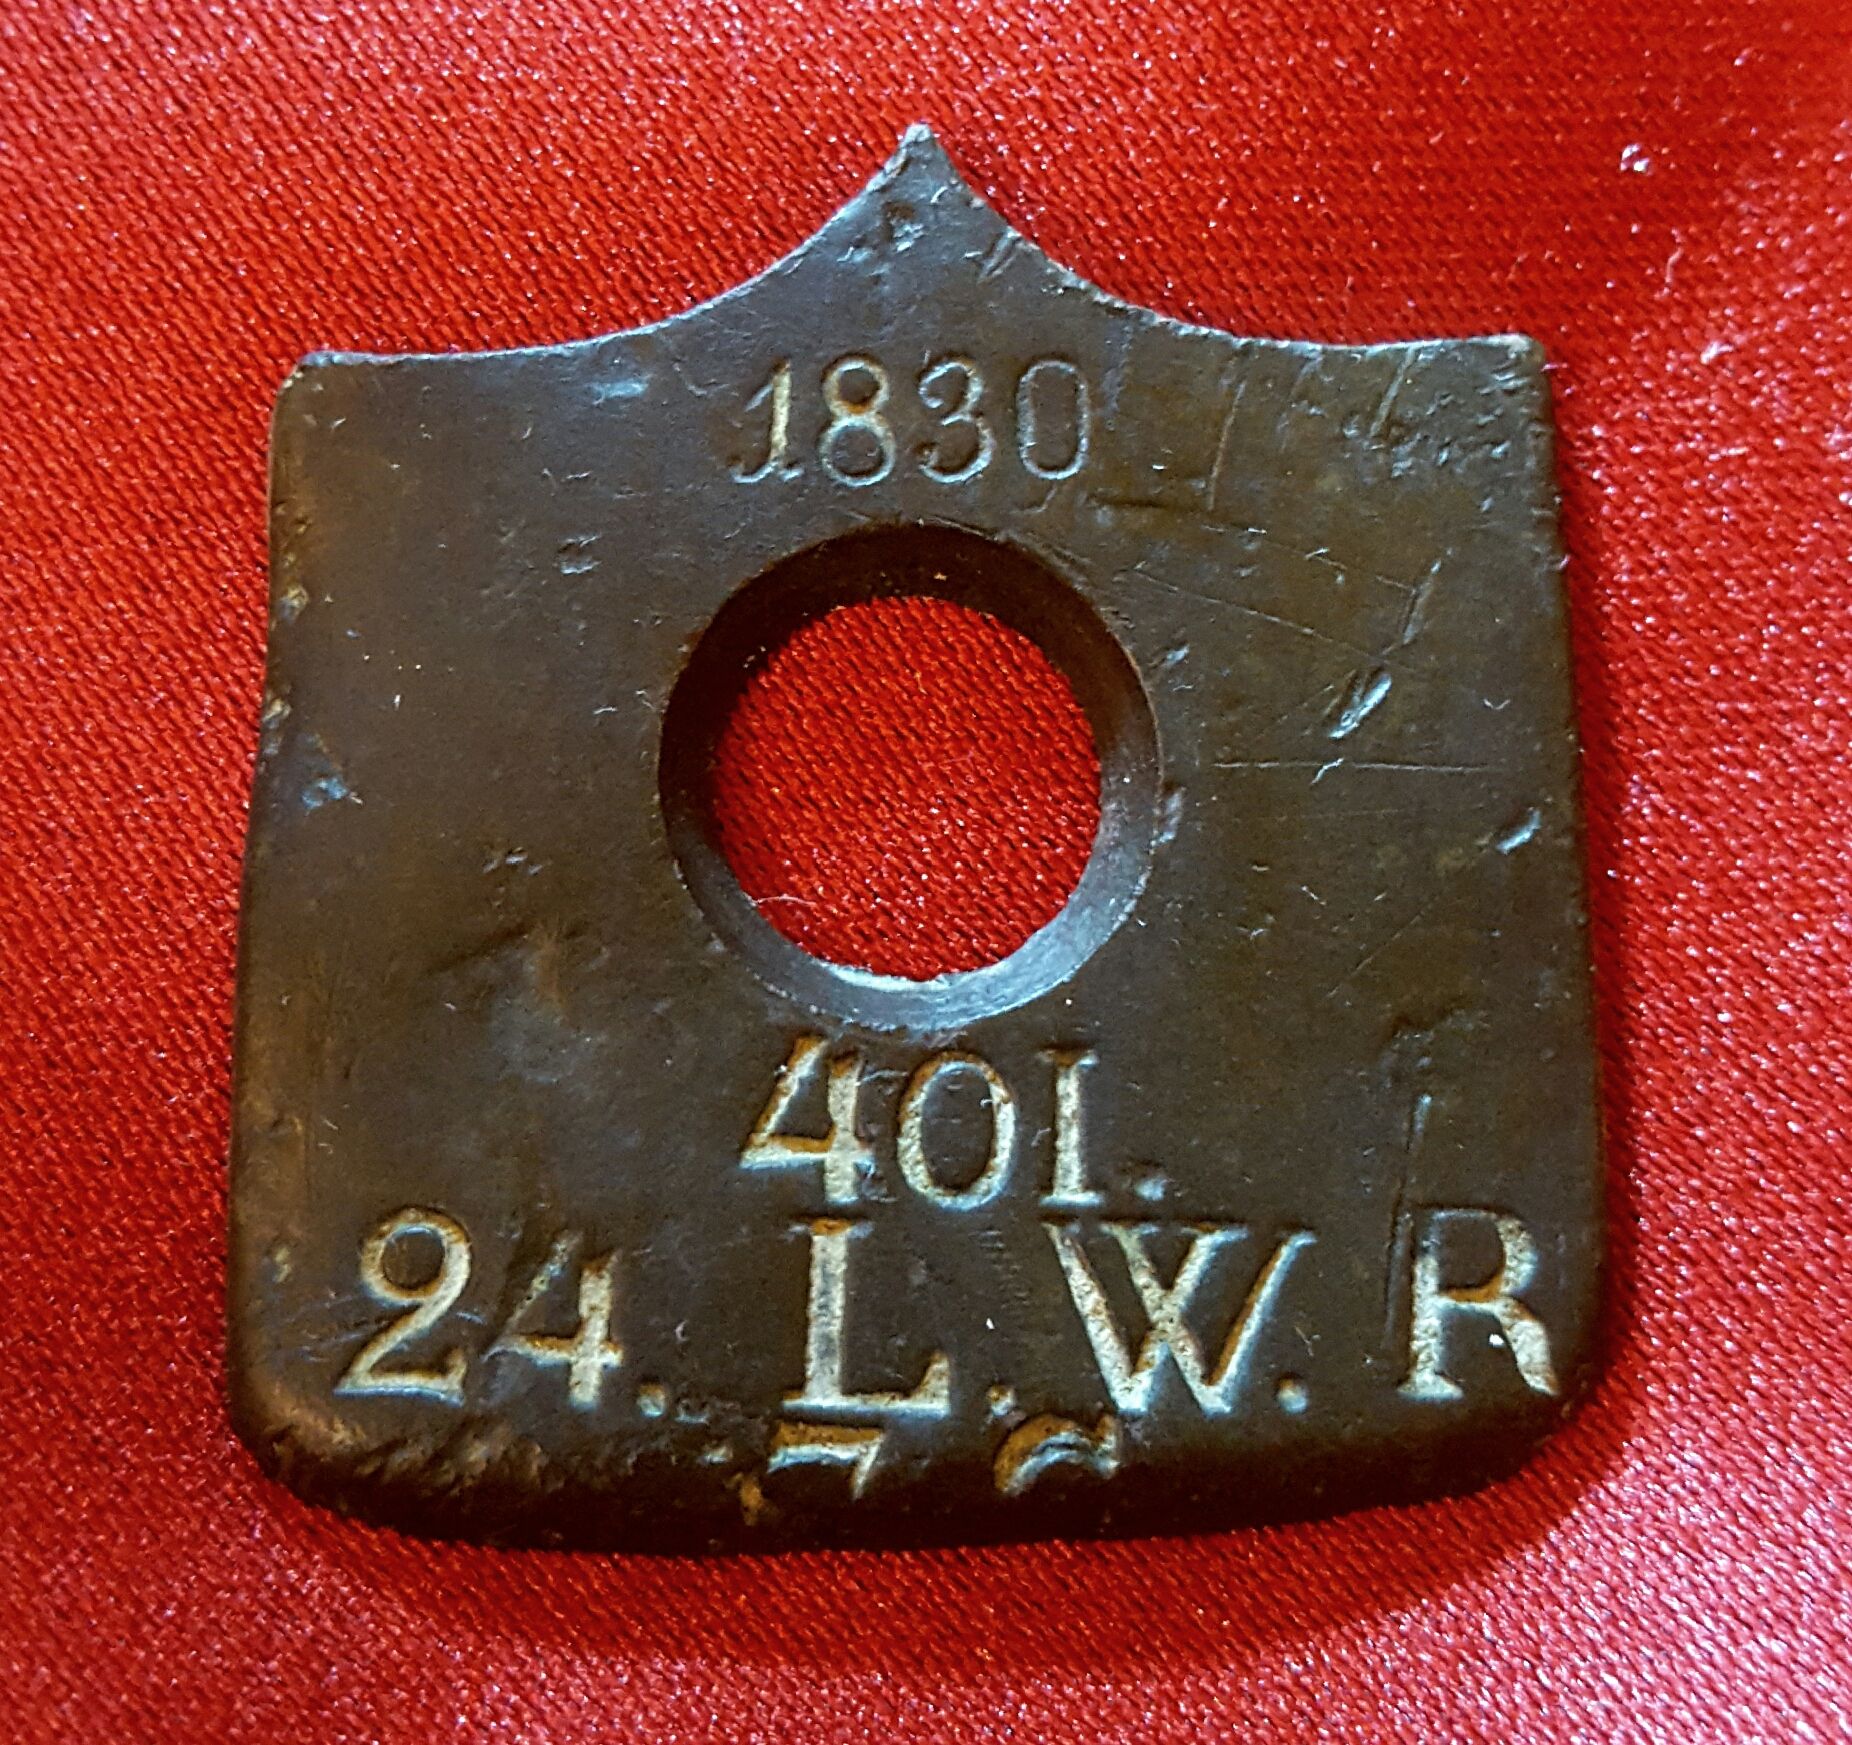 Partial butt plate from a Prussian musket.  Issued in 1830 to a Prussian soldier (in Germany) in the 24th Landweir Regiment (7th Company); repurposed 